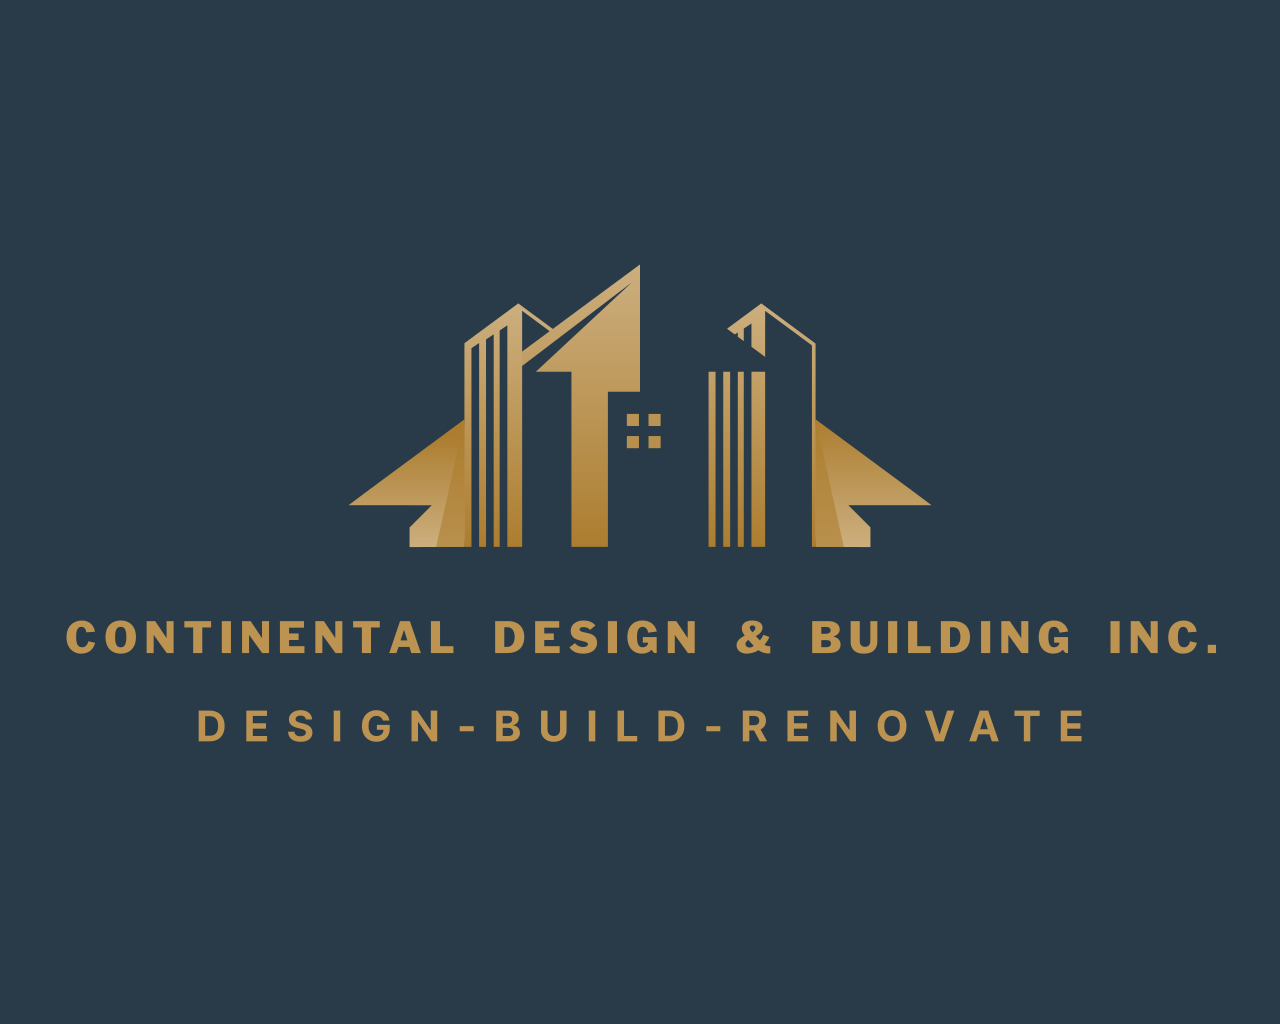 Continental Design and Building inc's logo